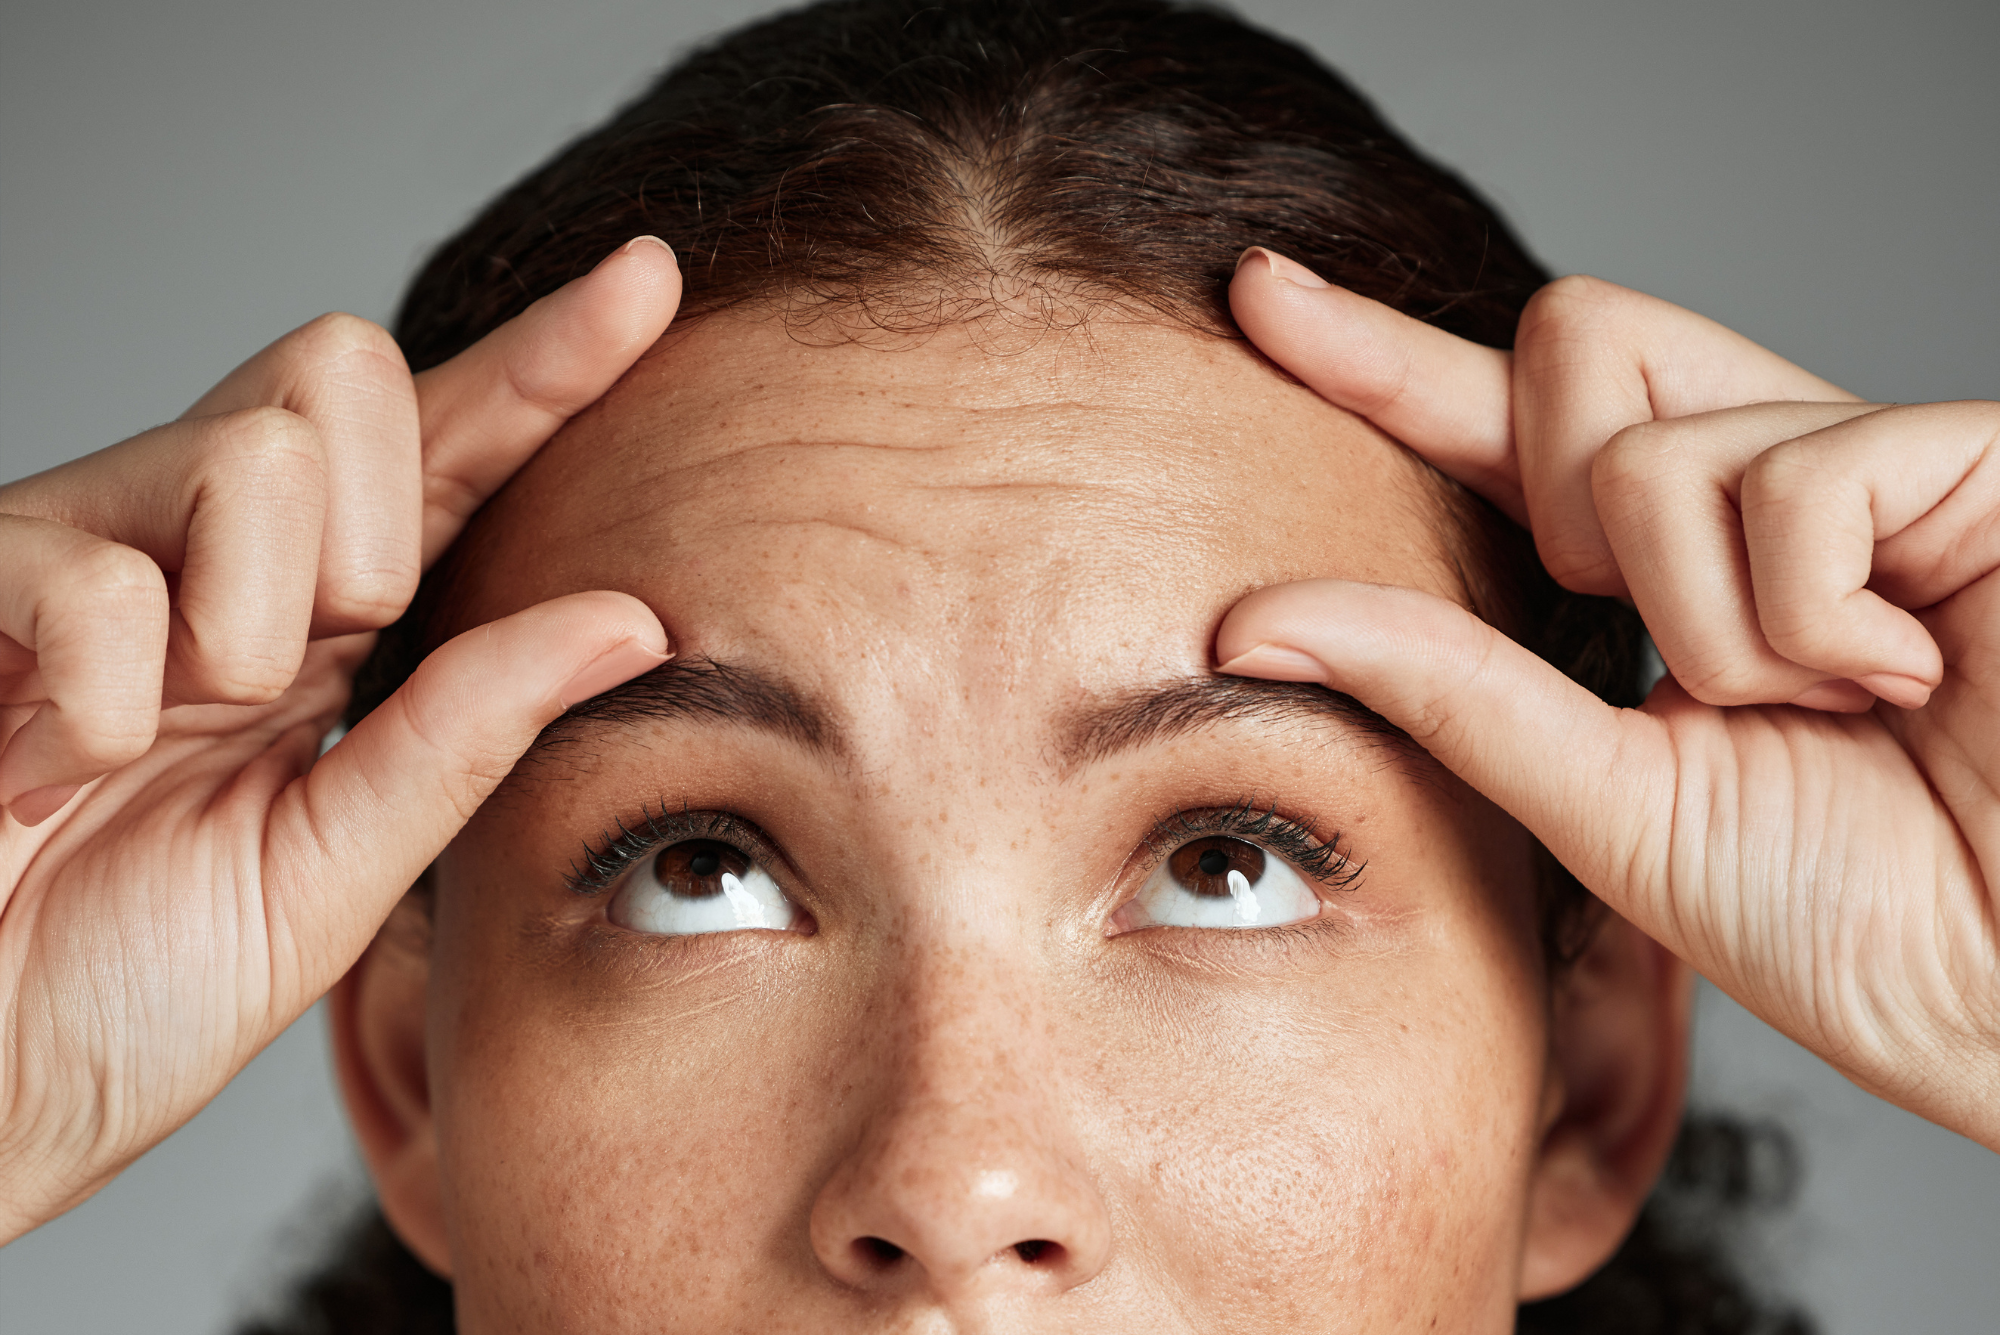 A woman pinches her forehead, showing that she needs Botox for her prominent forehead wrinkles.